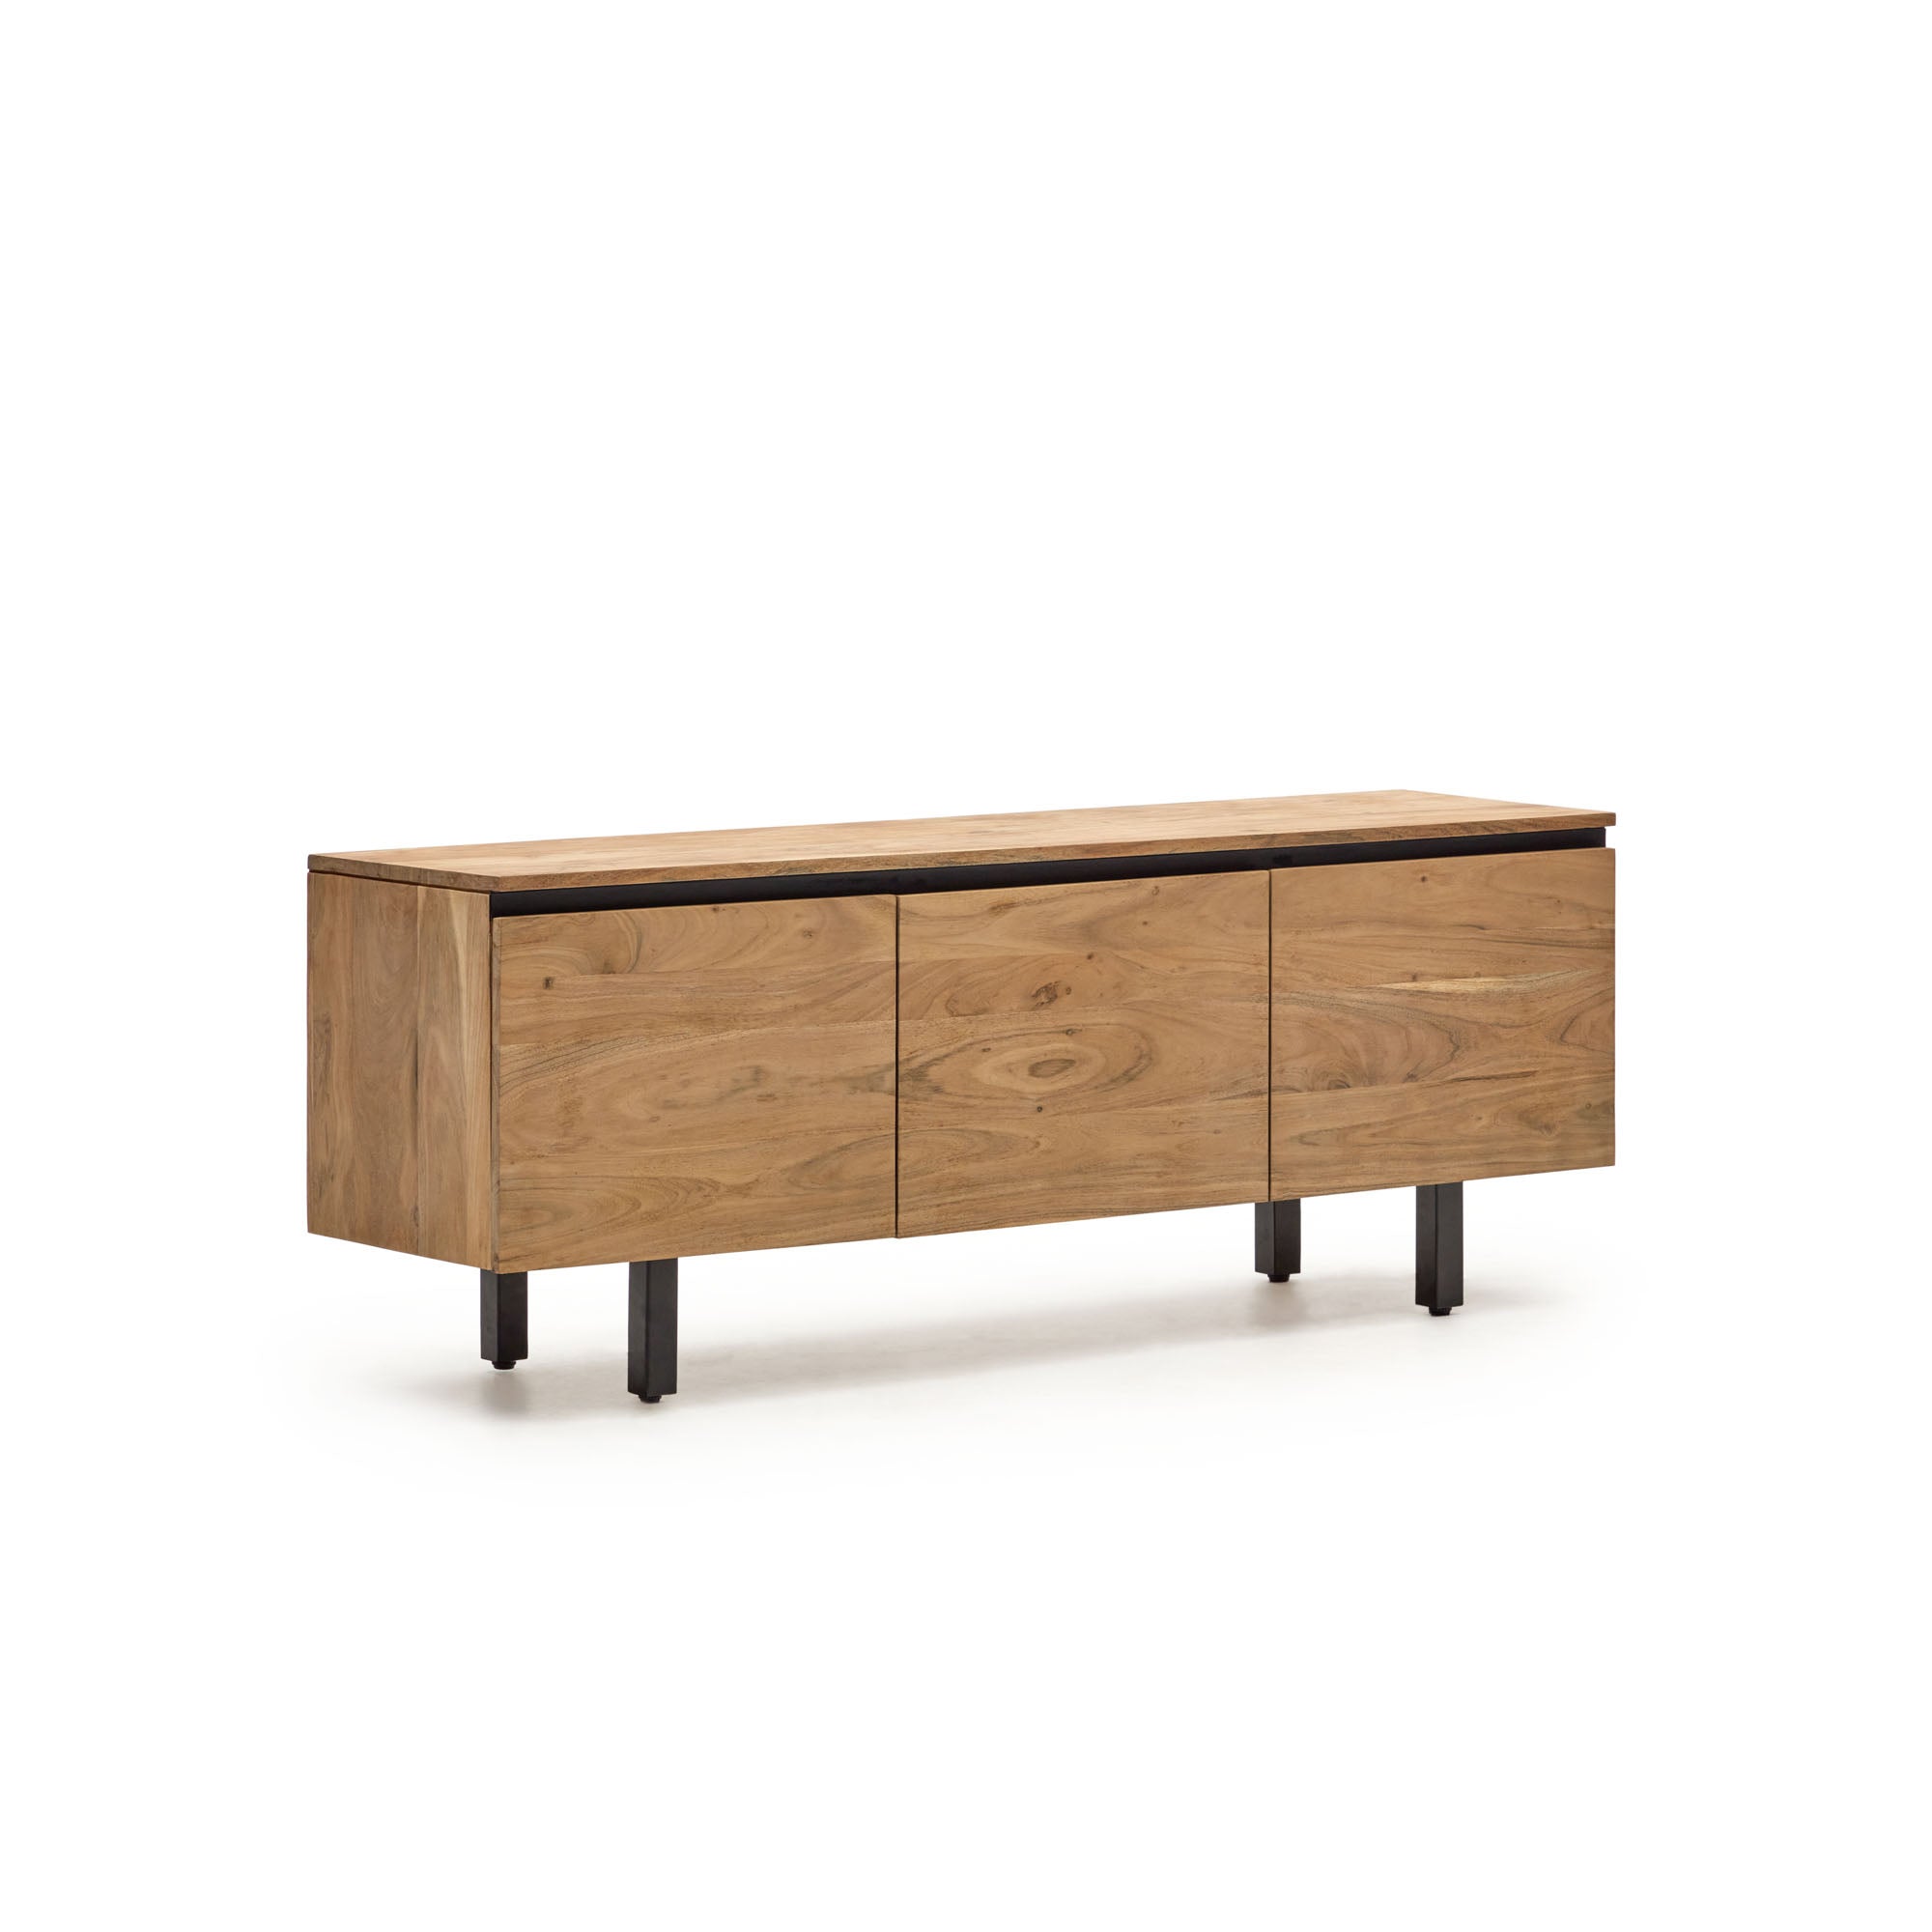 Uxue TV stand with 3 solid acacia wood doors in a natural finish, 150 x 58 cm